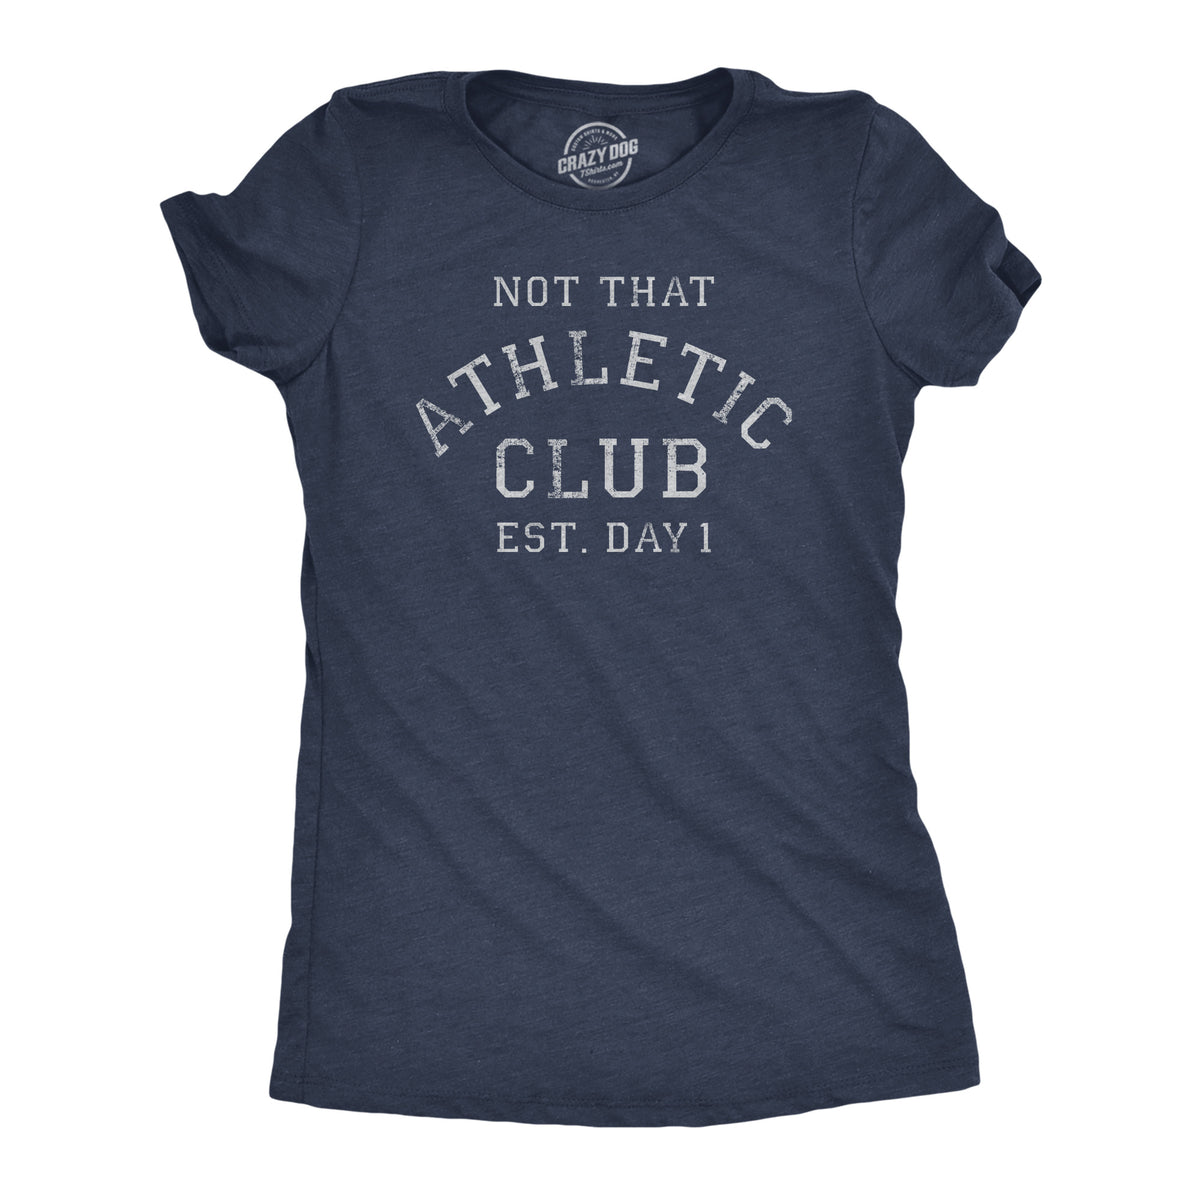 Funny Heather Navy - ATHLETIC Not That Athletic Club Womens T Shirt Nerdy Sarcastic fitness Tee